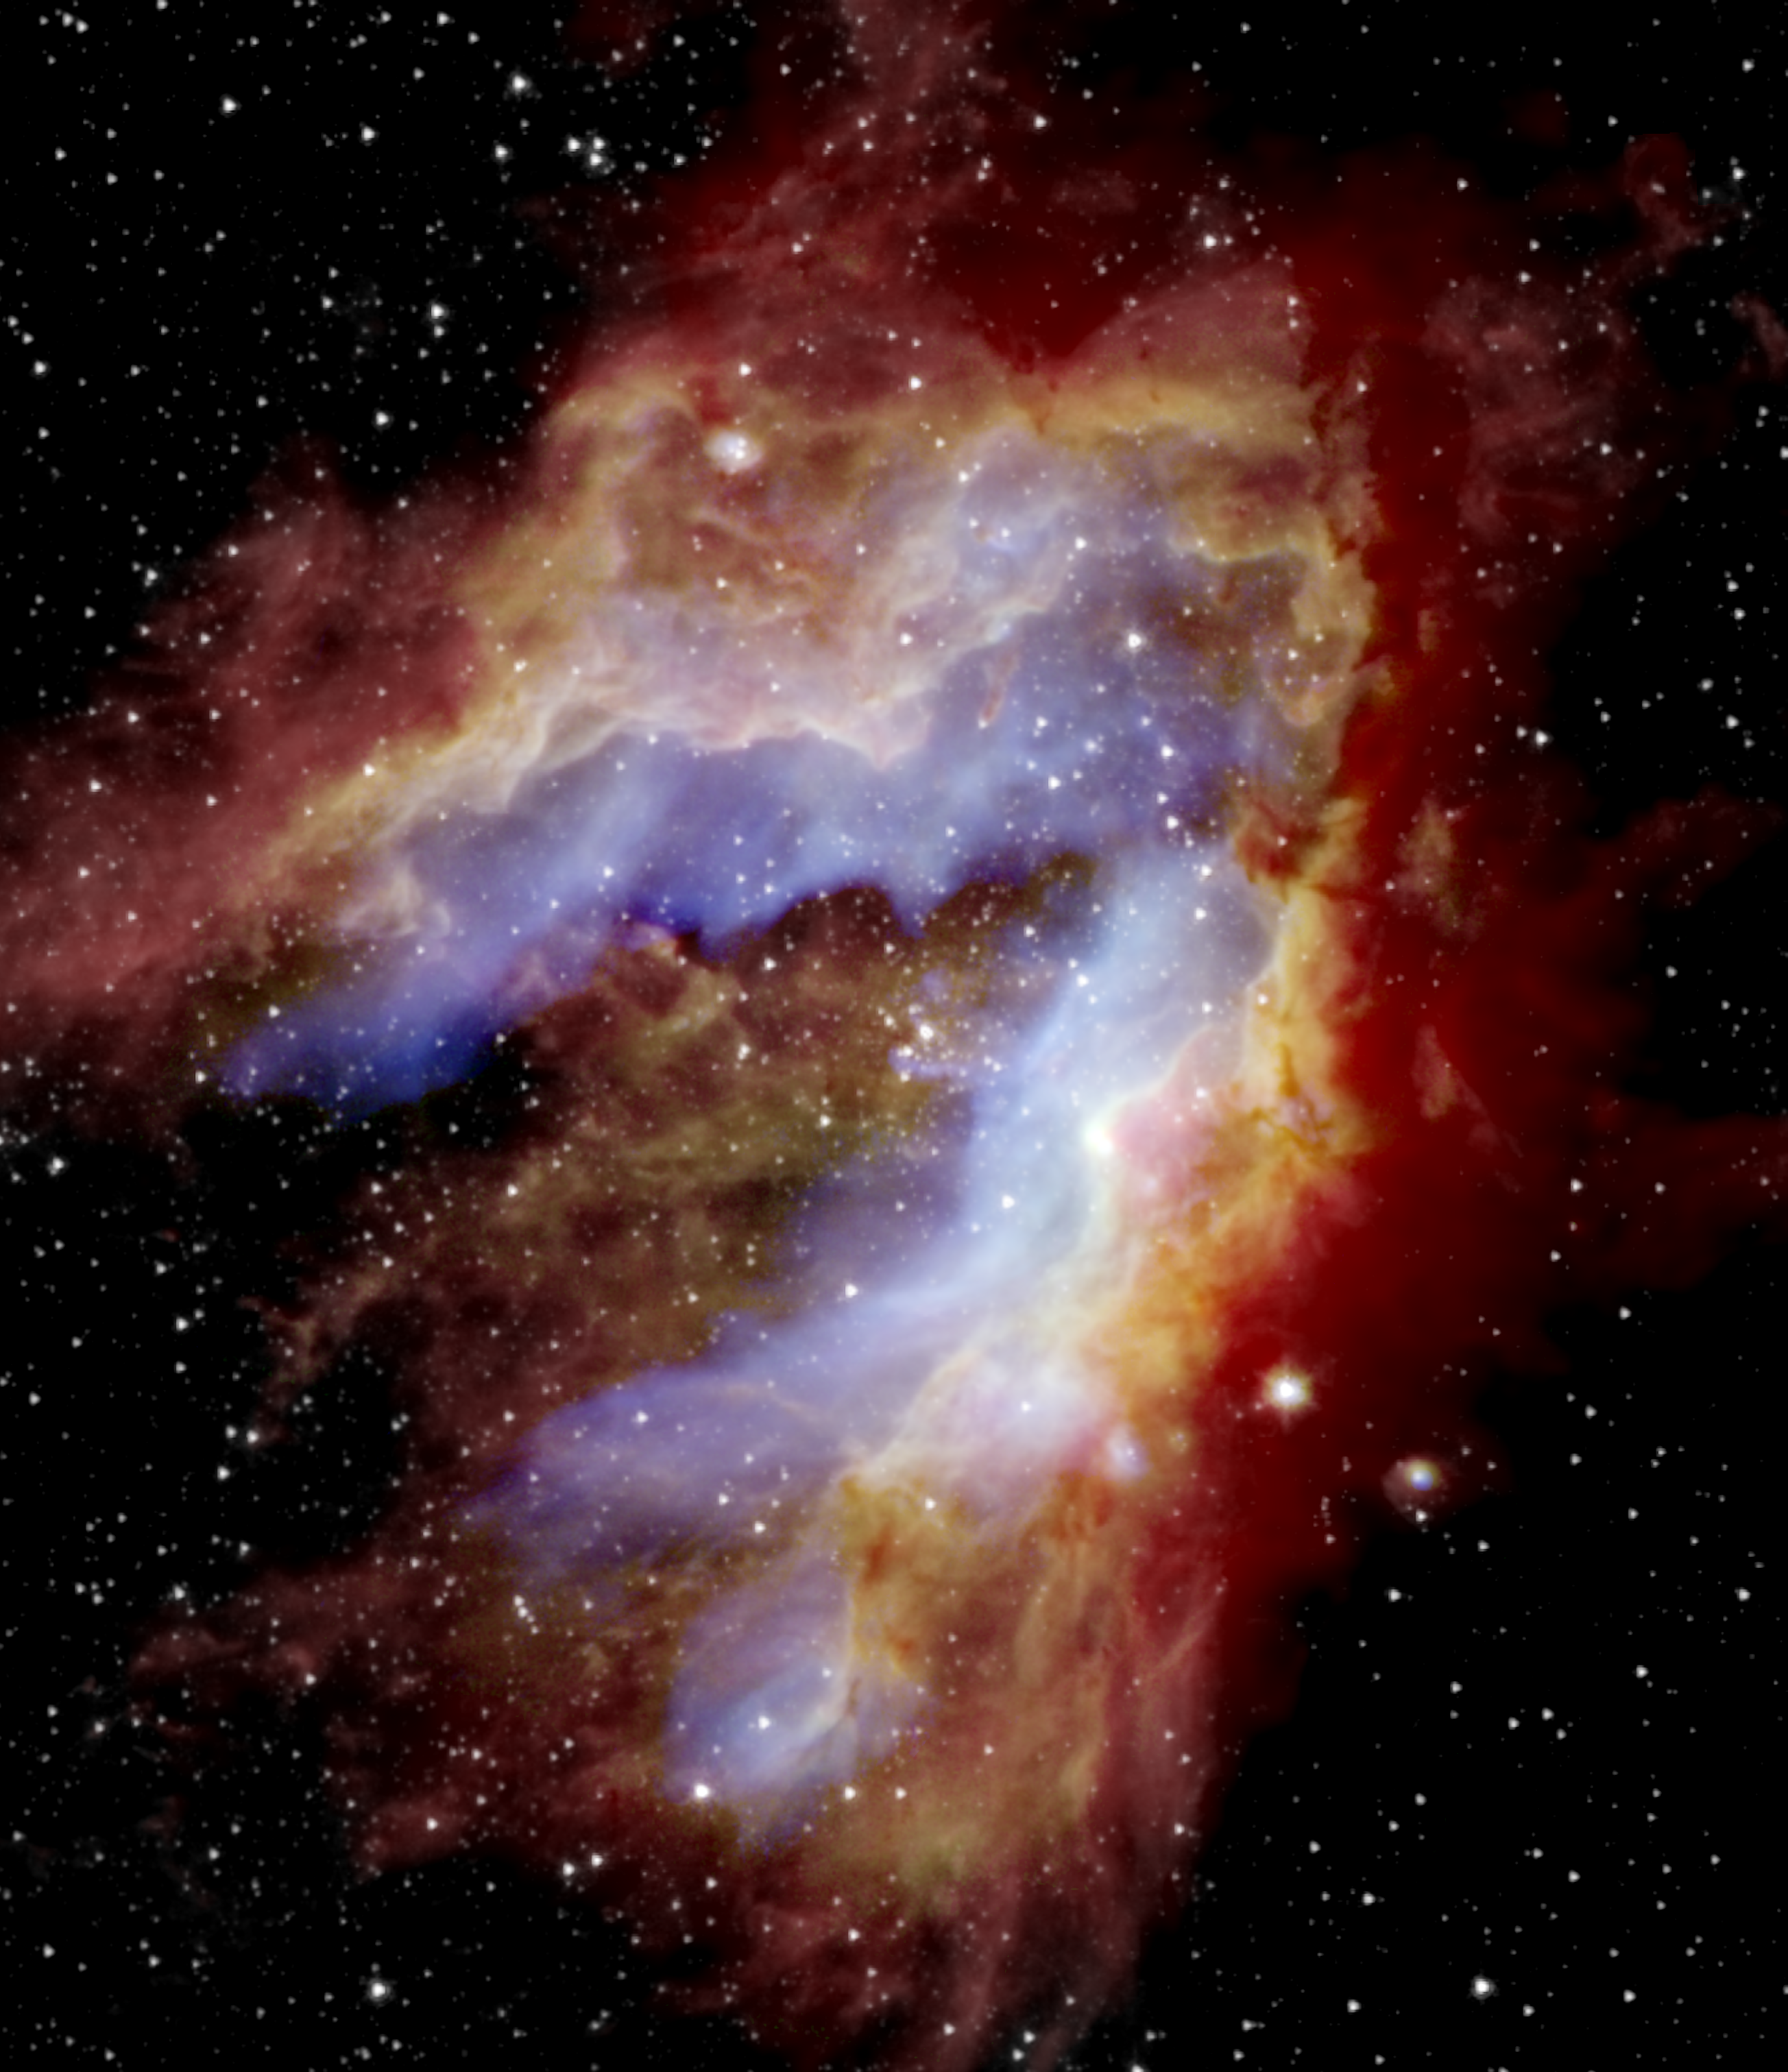 Against a starry background sits a nebula that resembles the neck and head of a swan who is looking to the left. The cloudy nebula is a dark red on the edges that would be the right side of the swan’s neck and top of its head. This fades into a pale yellow on the left side of the swan’s neck and the bottom of the head and beak. Inside the crook of the neck there is a semi-transparent blue cloud. All of this is on a black, starry background.